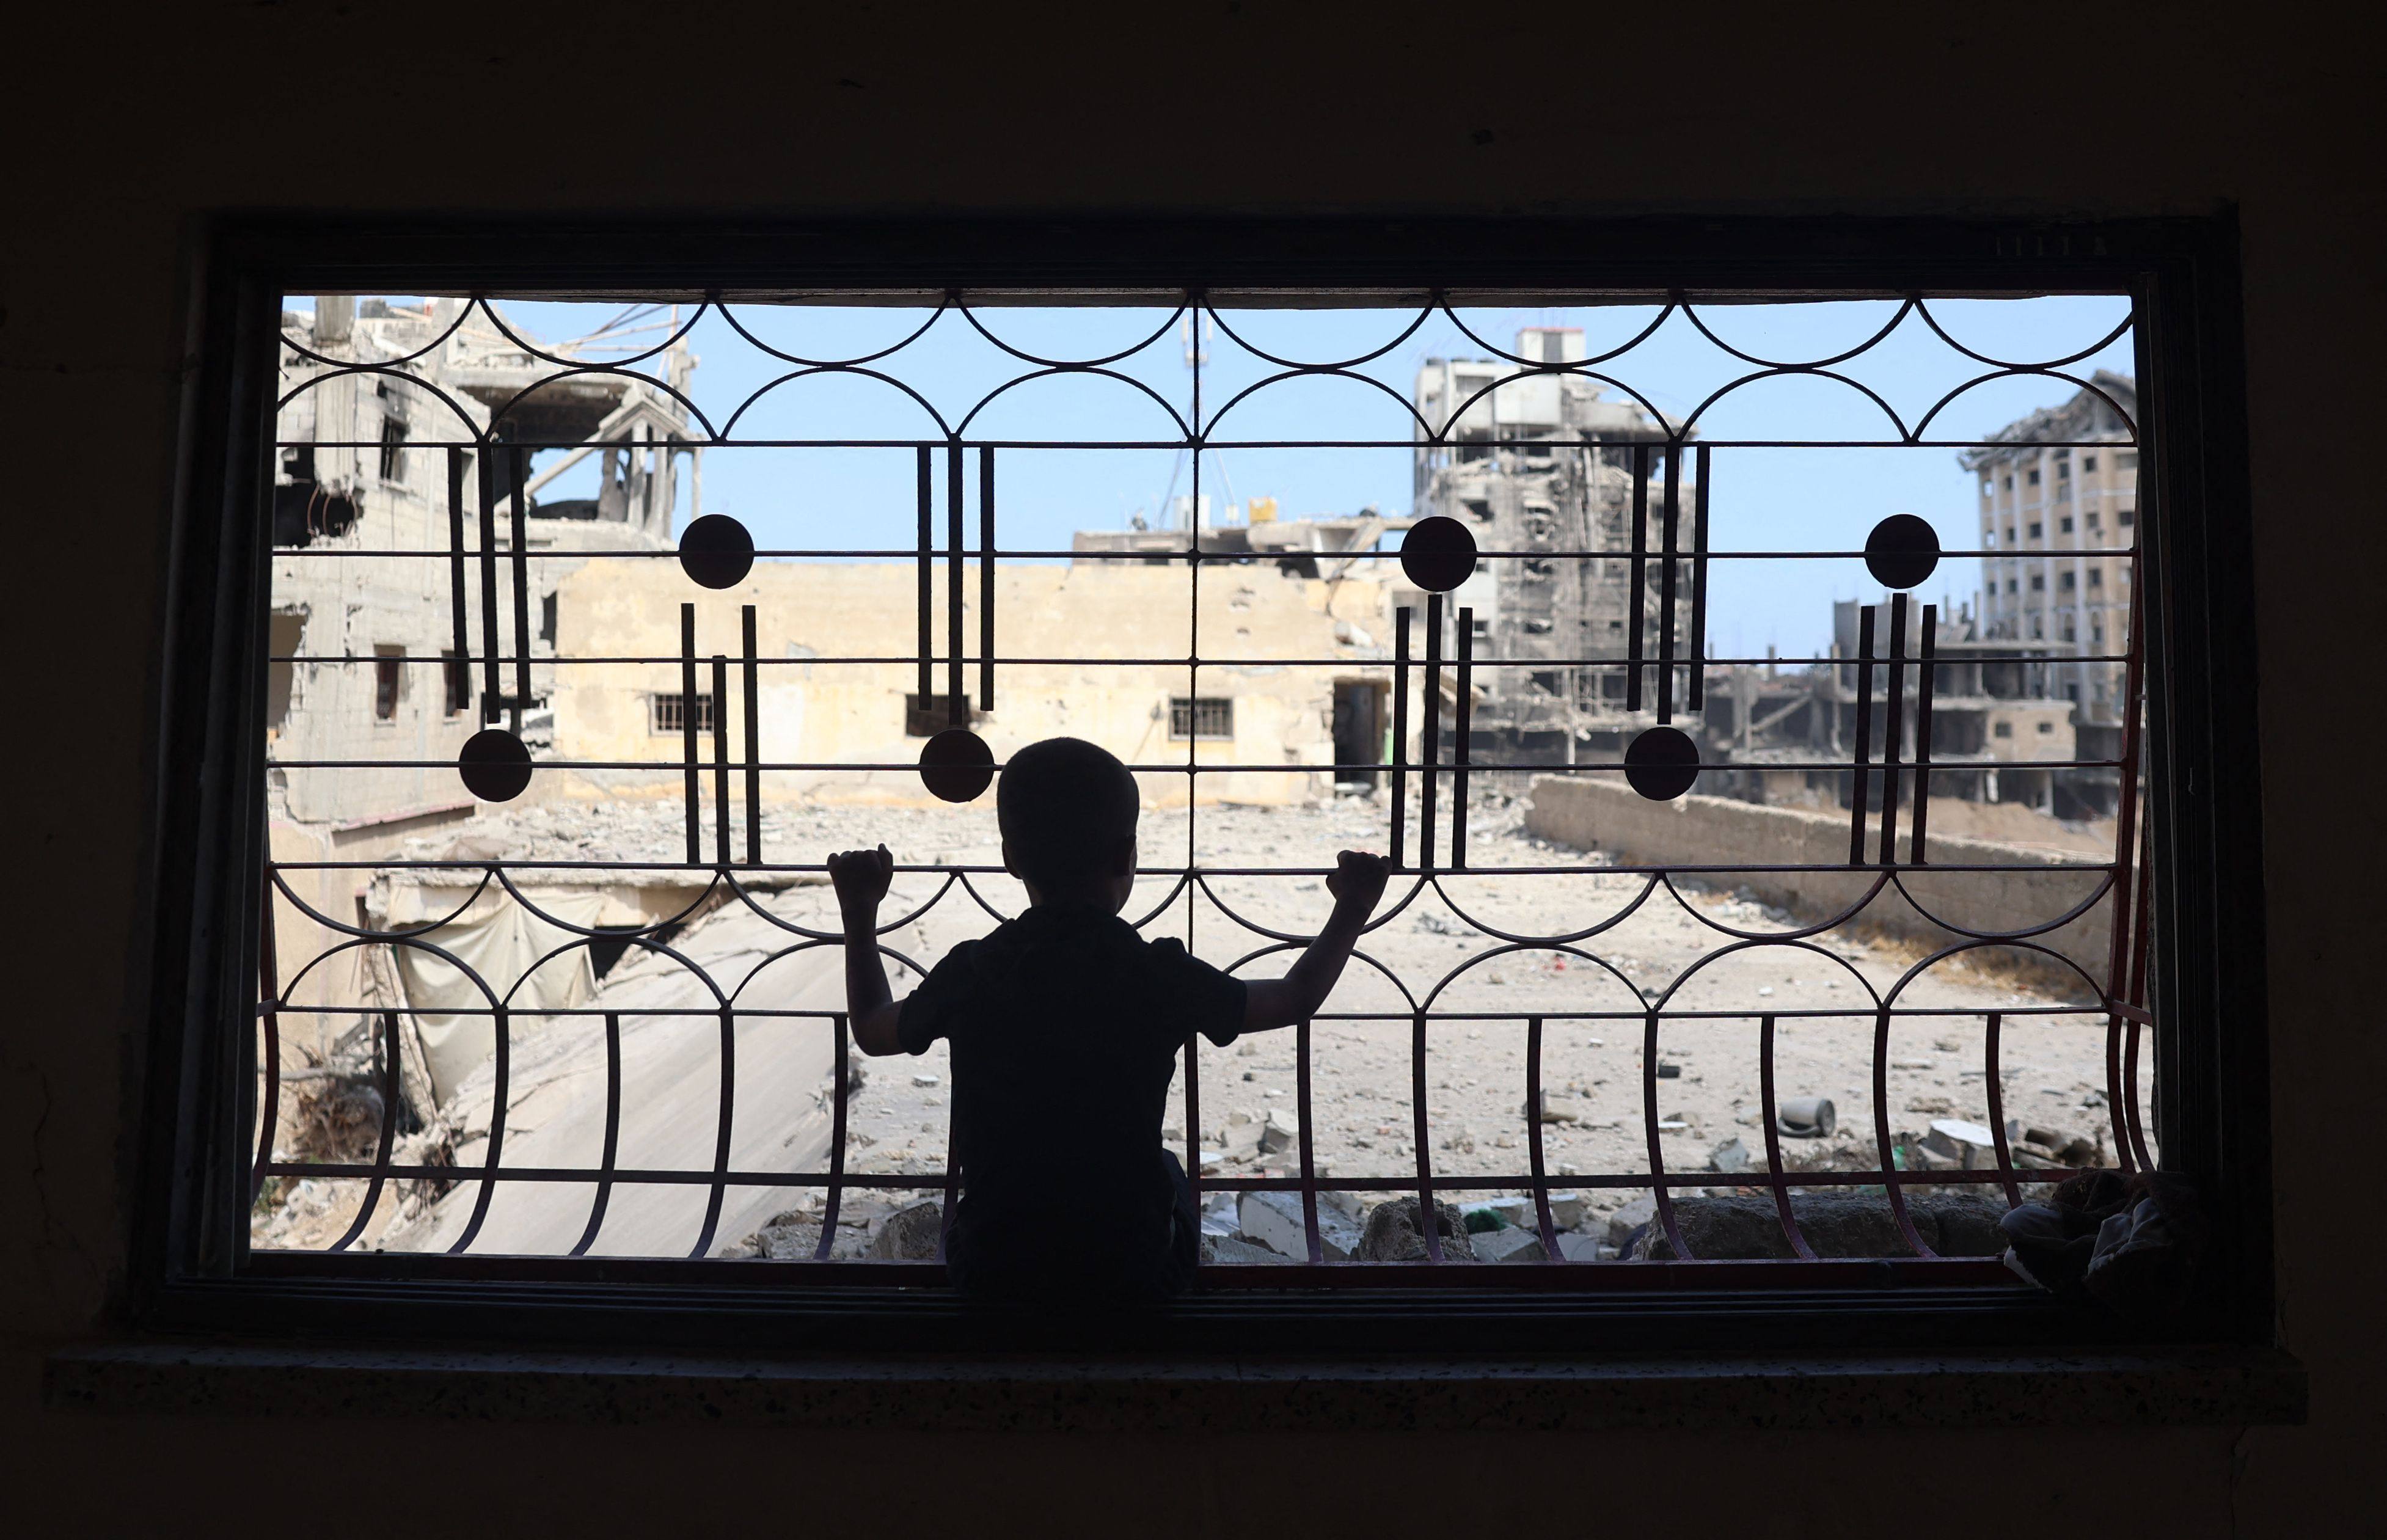 A Palestinian child looks out from the window of a home damaged from previous Israeli bombardment, as residents return to the city of Khan Younis, in the southern Gaza Strip, on Sunday. Photo: AFP